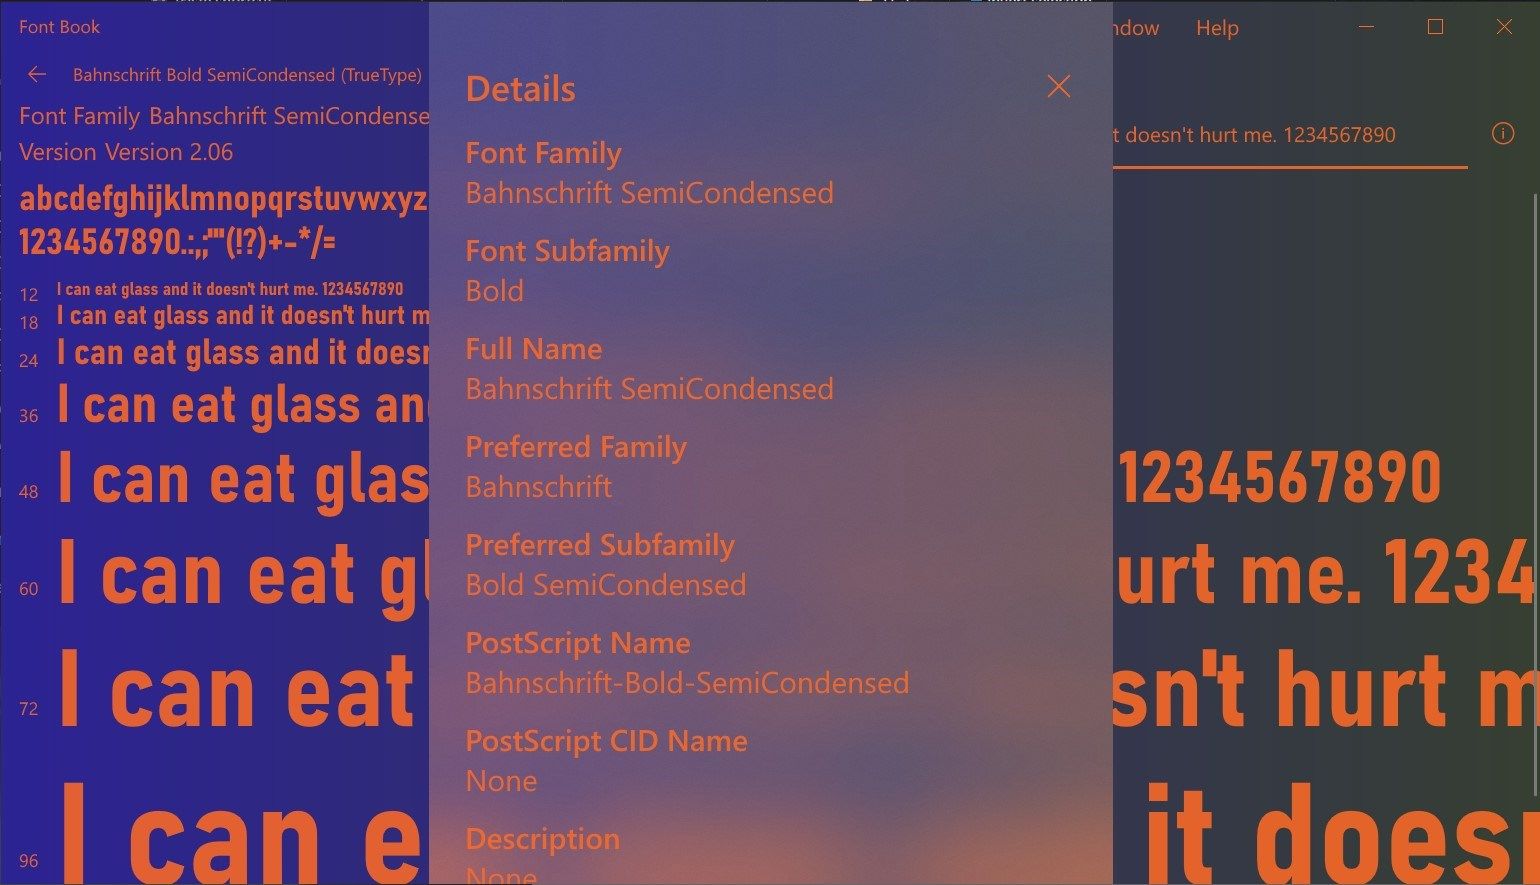 Text View